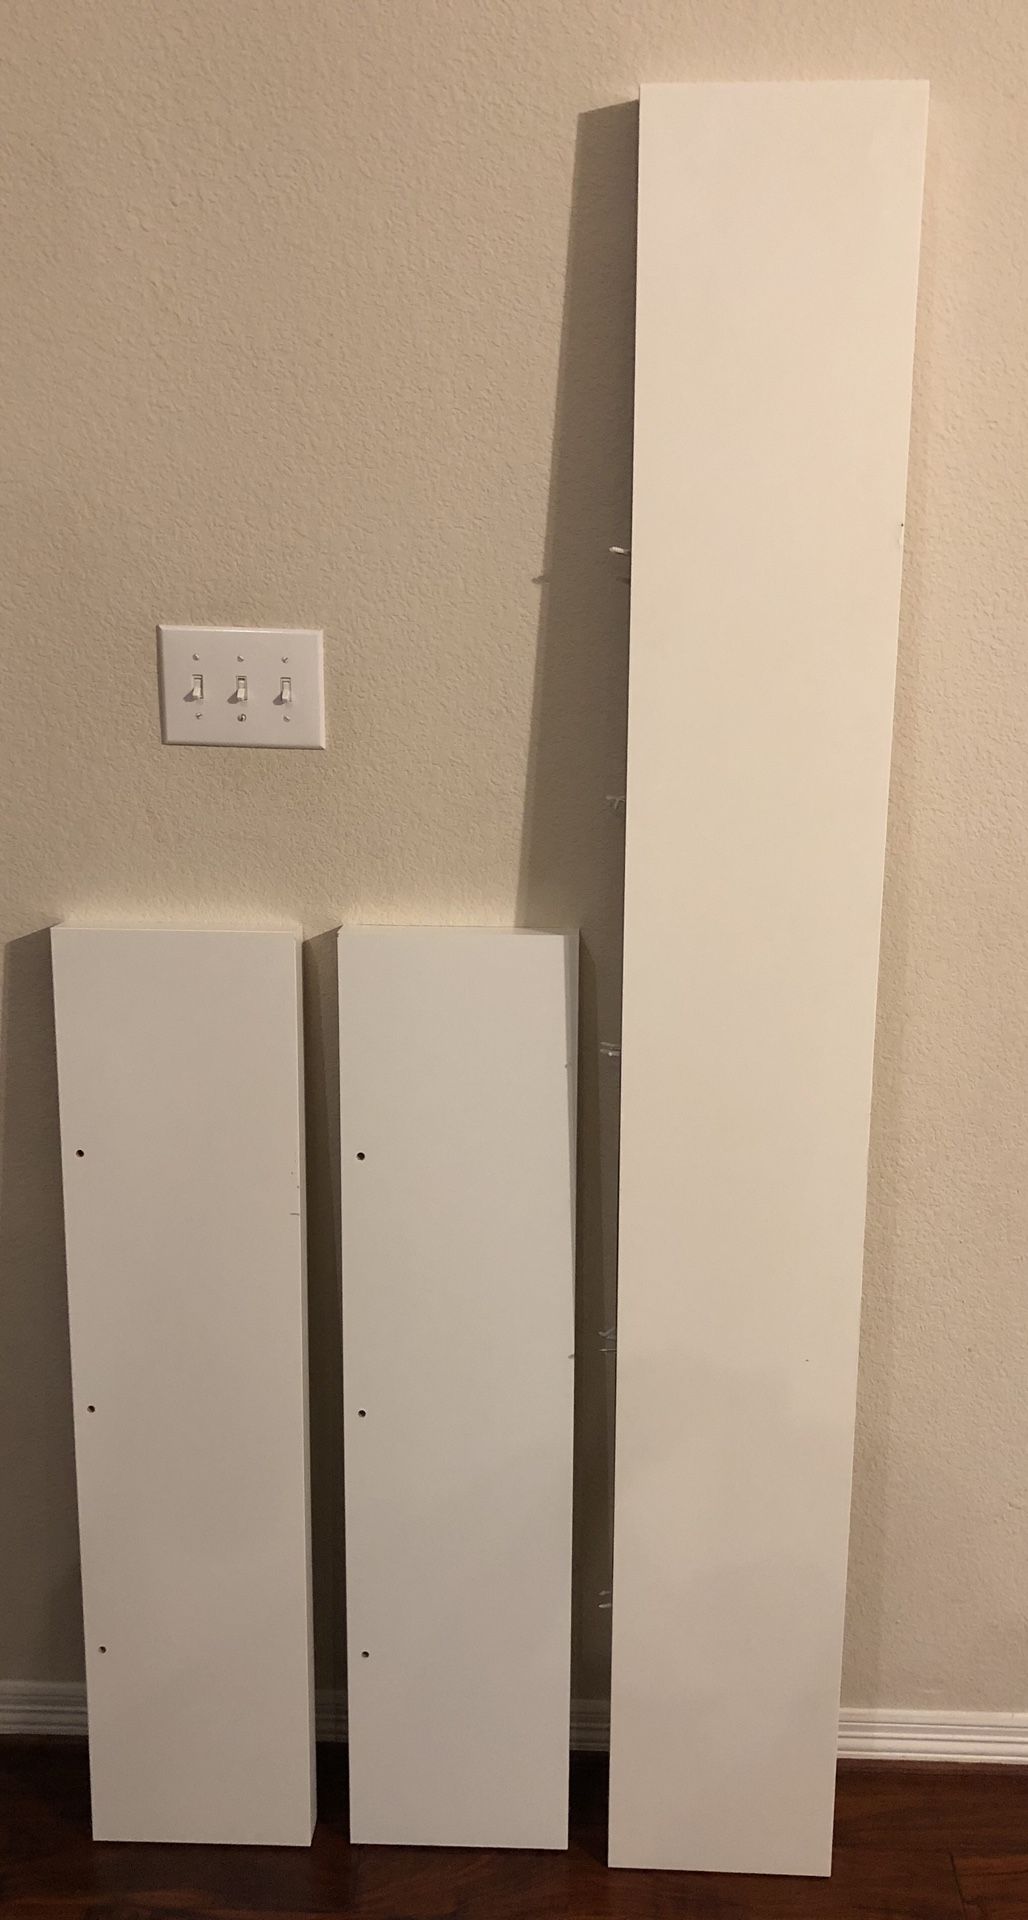 3 IKEA shelves ... 1 is 75in, other 2 are 44in